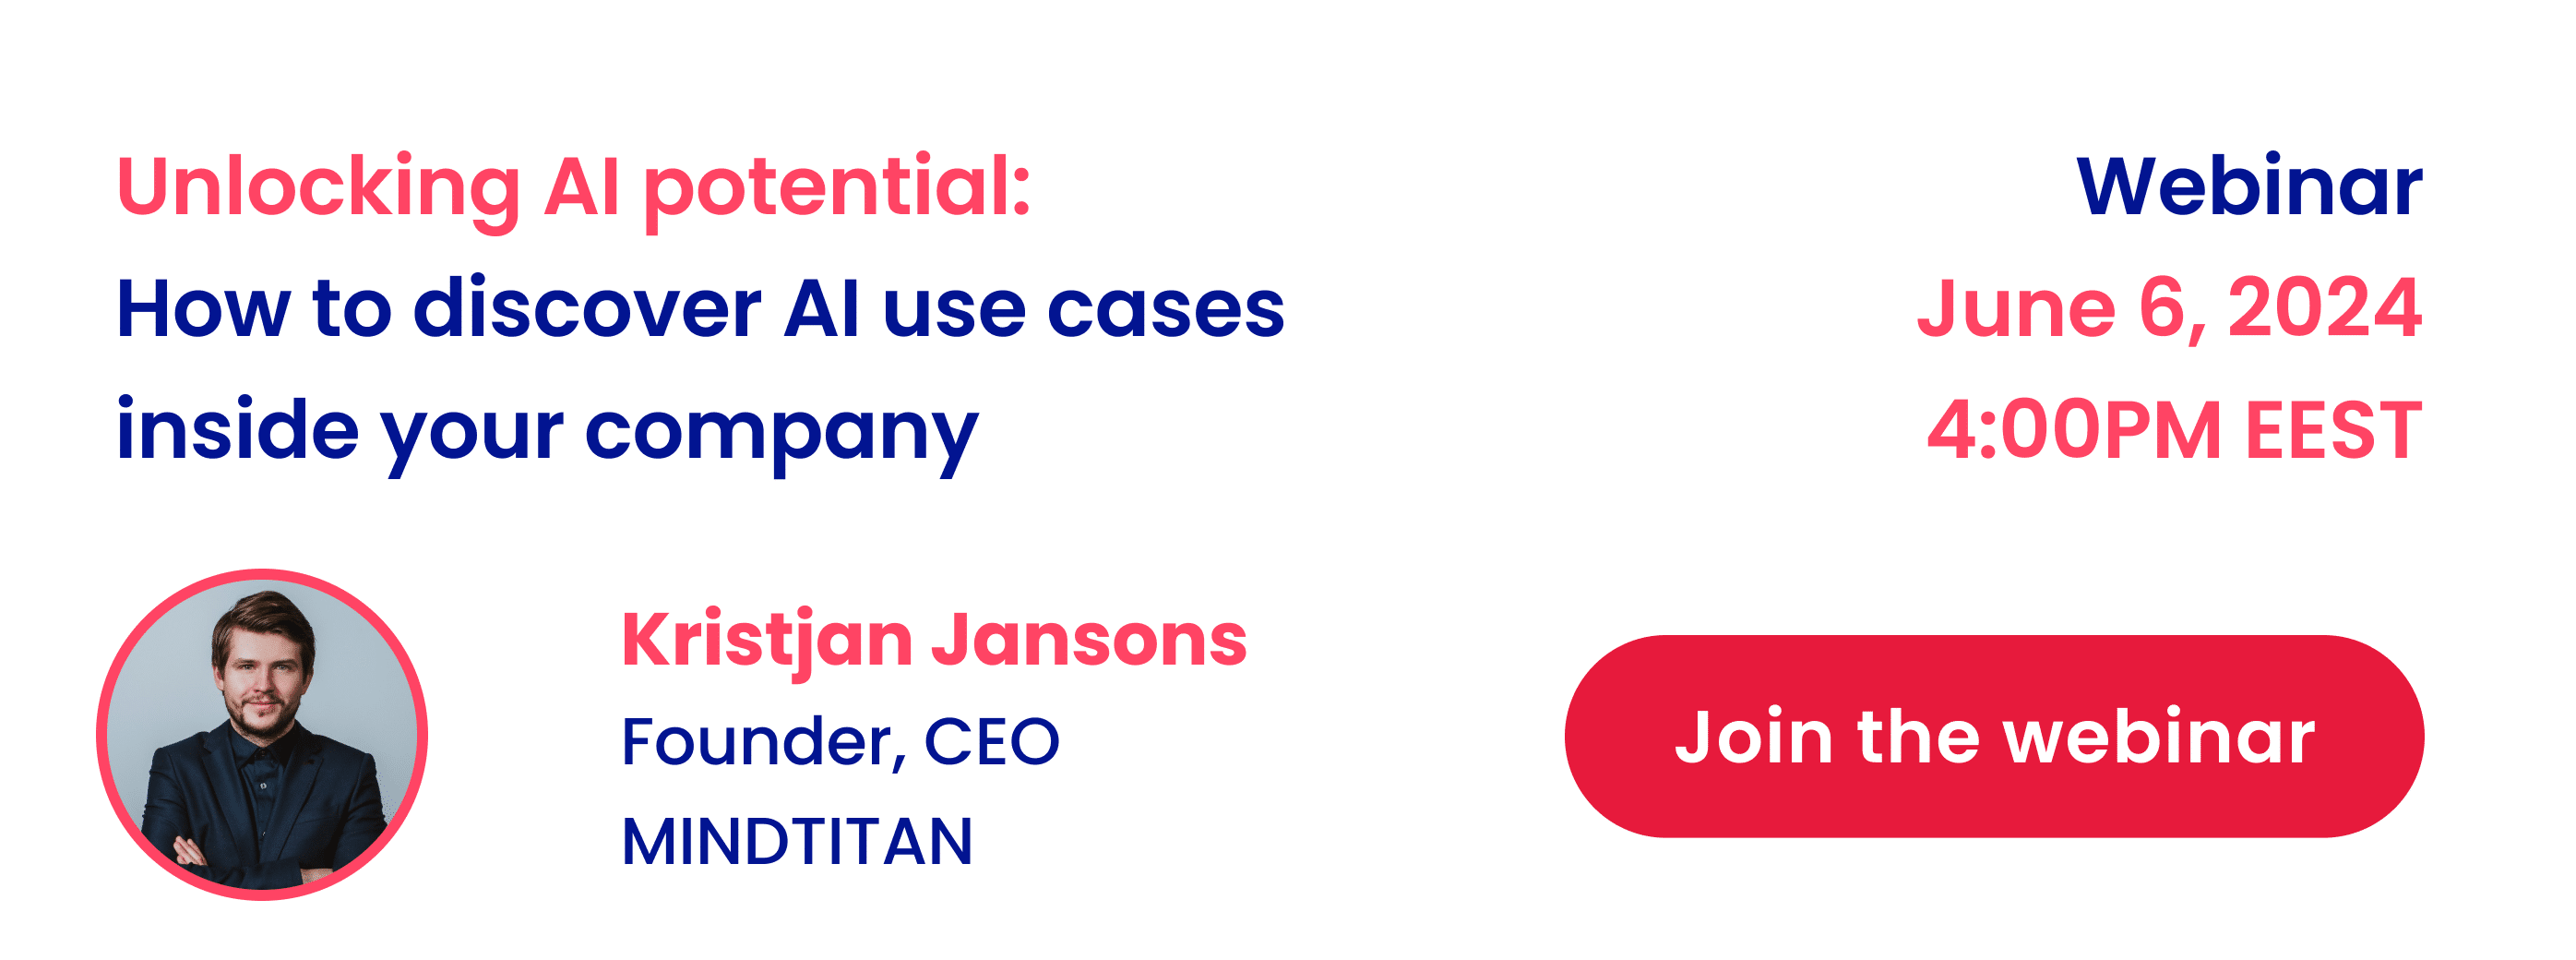 Unlocking AI potential: How to discover AI use cases inside your company announcement